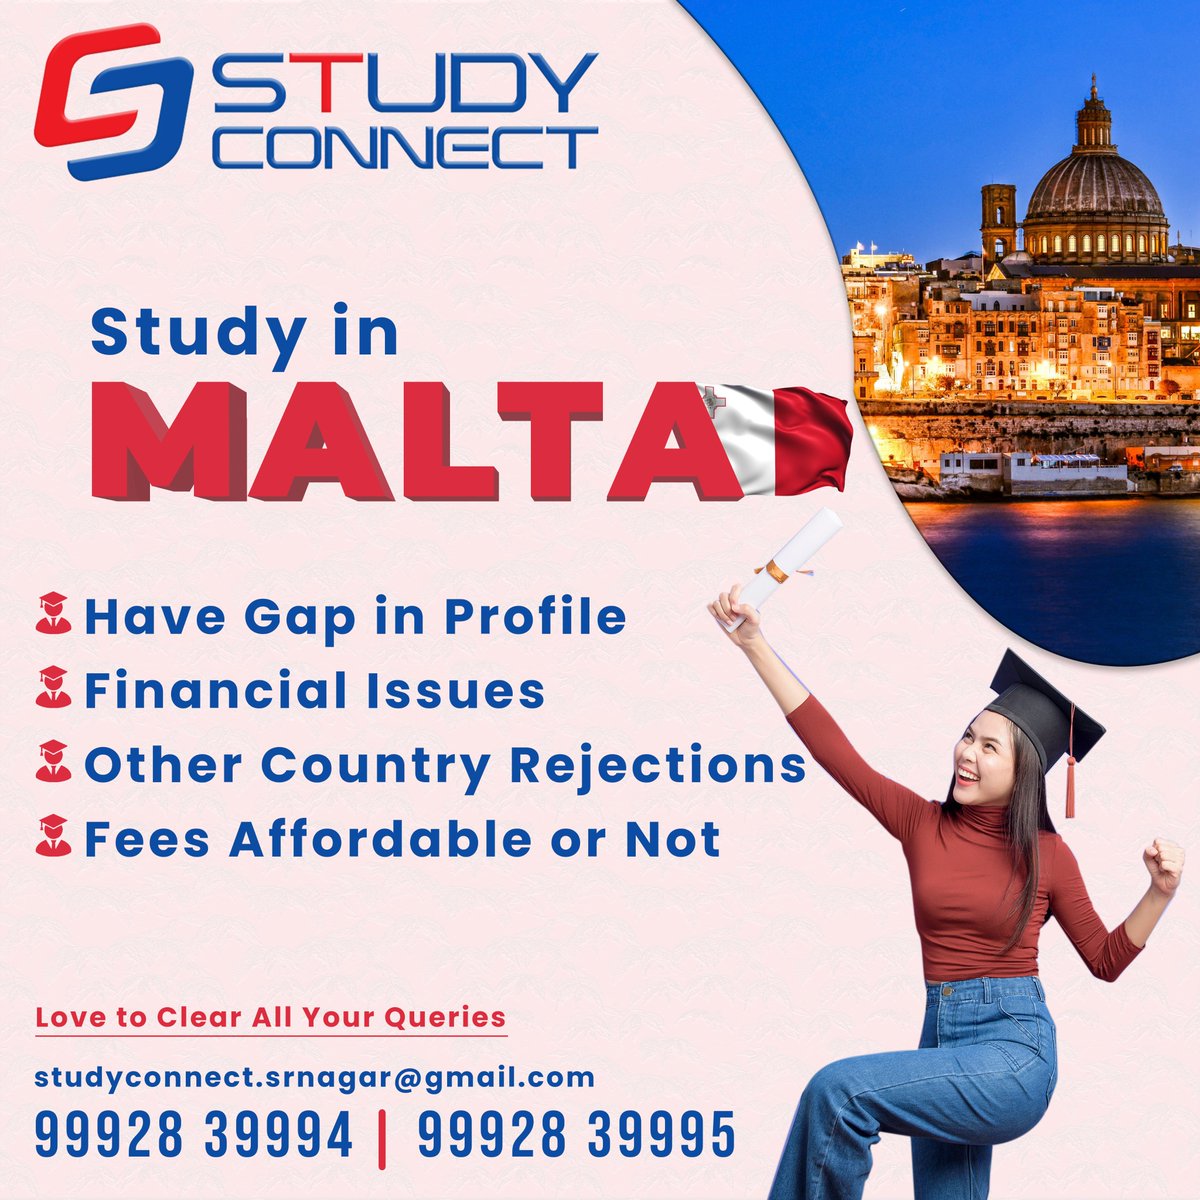 Study Connect Overseas Education Consultancy, Hyderabad SR Nagar, is your guide to a transformative educational experience in picturesque Malta! 🌅📚 #StudyInMalta #GlobalEducation #MaltaAdventures #StudentLifeMalta #LearningInMalta #FYP